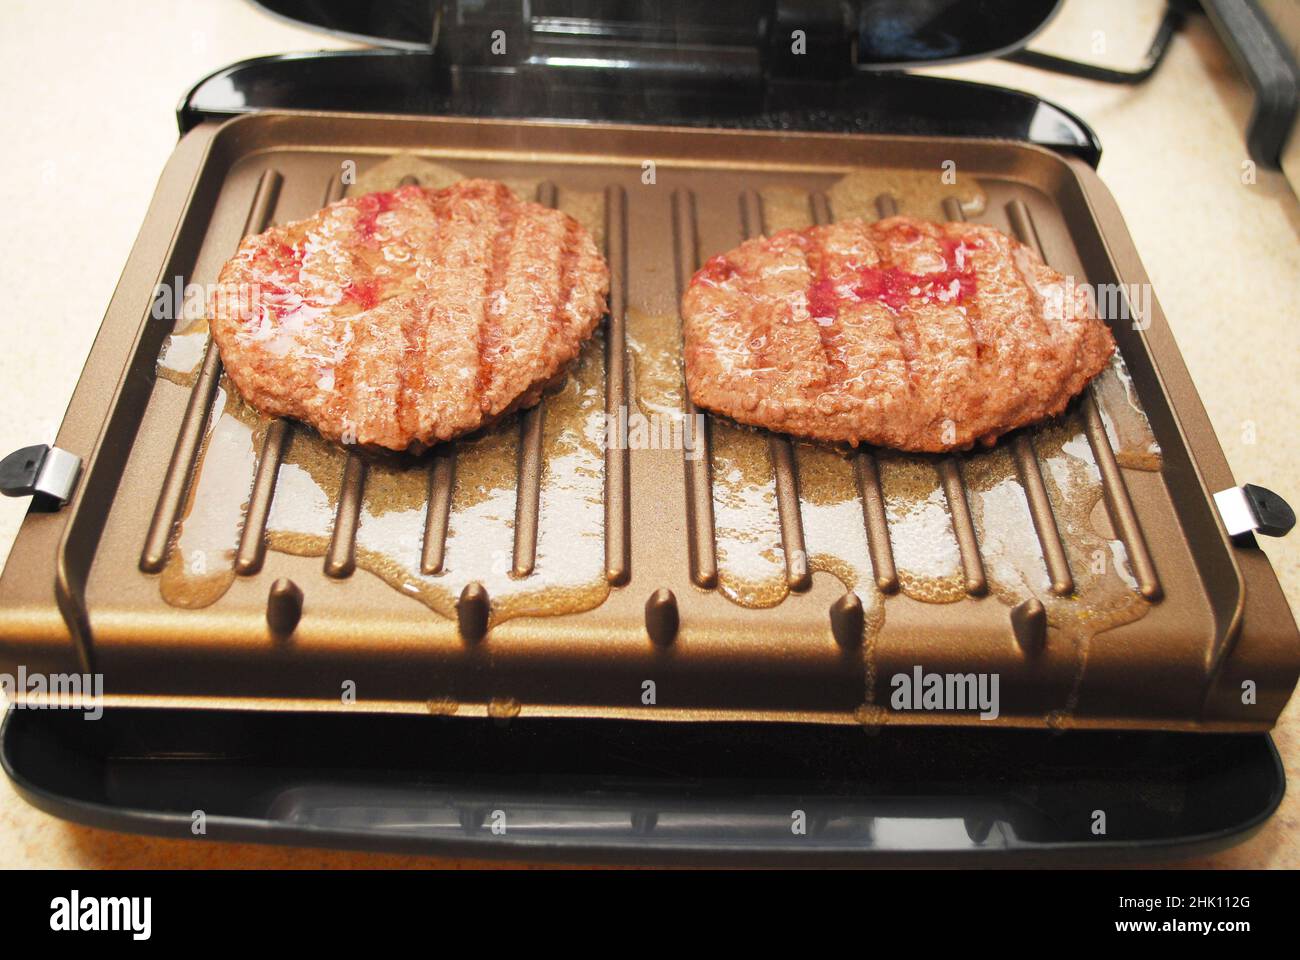 https://c8.alamy.com/comp/2HK112G/two-burger-cooking-on-an-indoor-grill-2HK112G.jpg